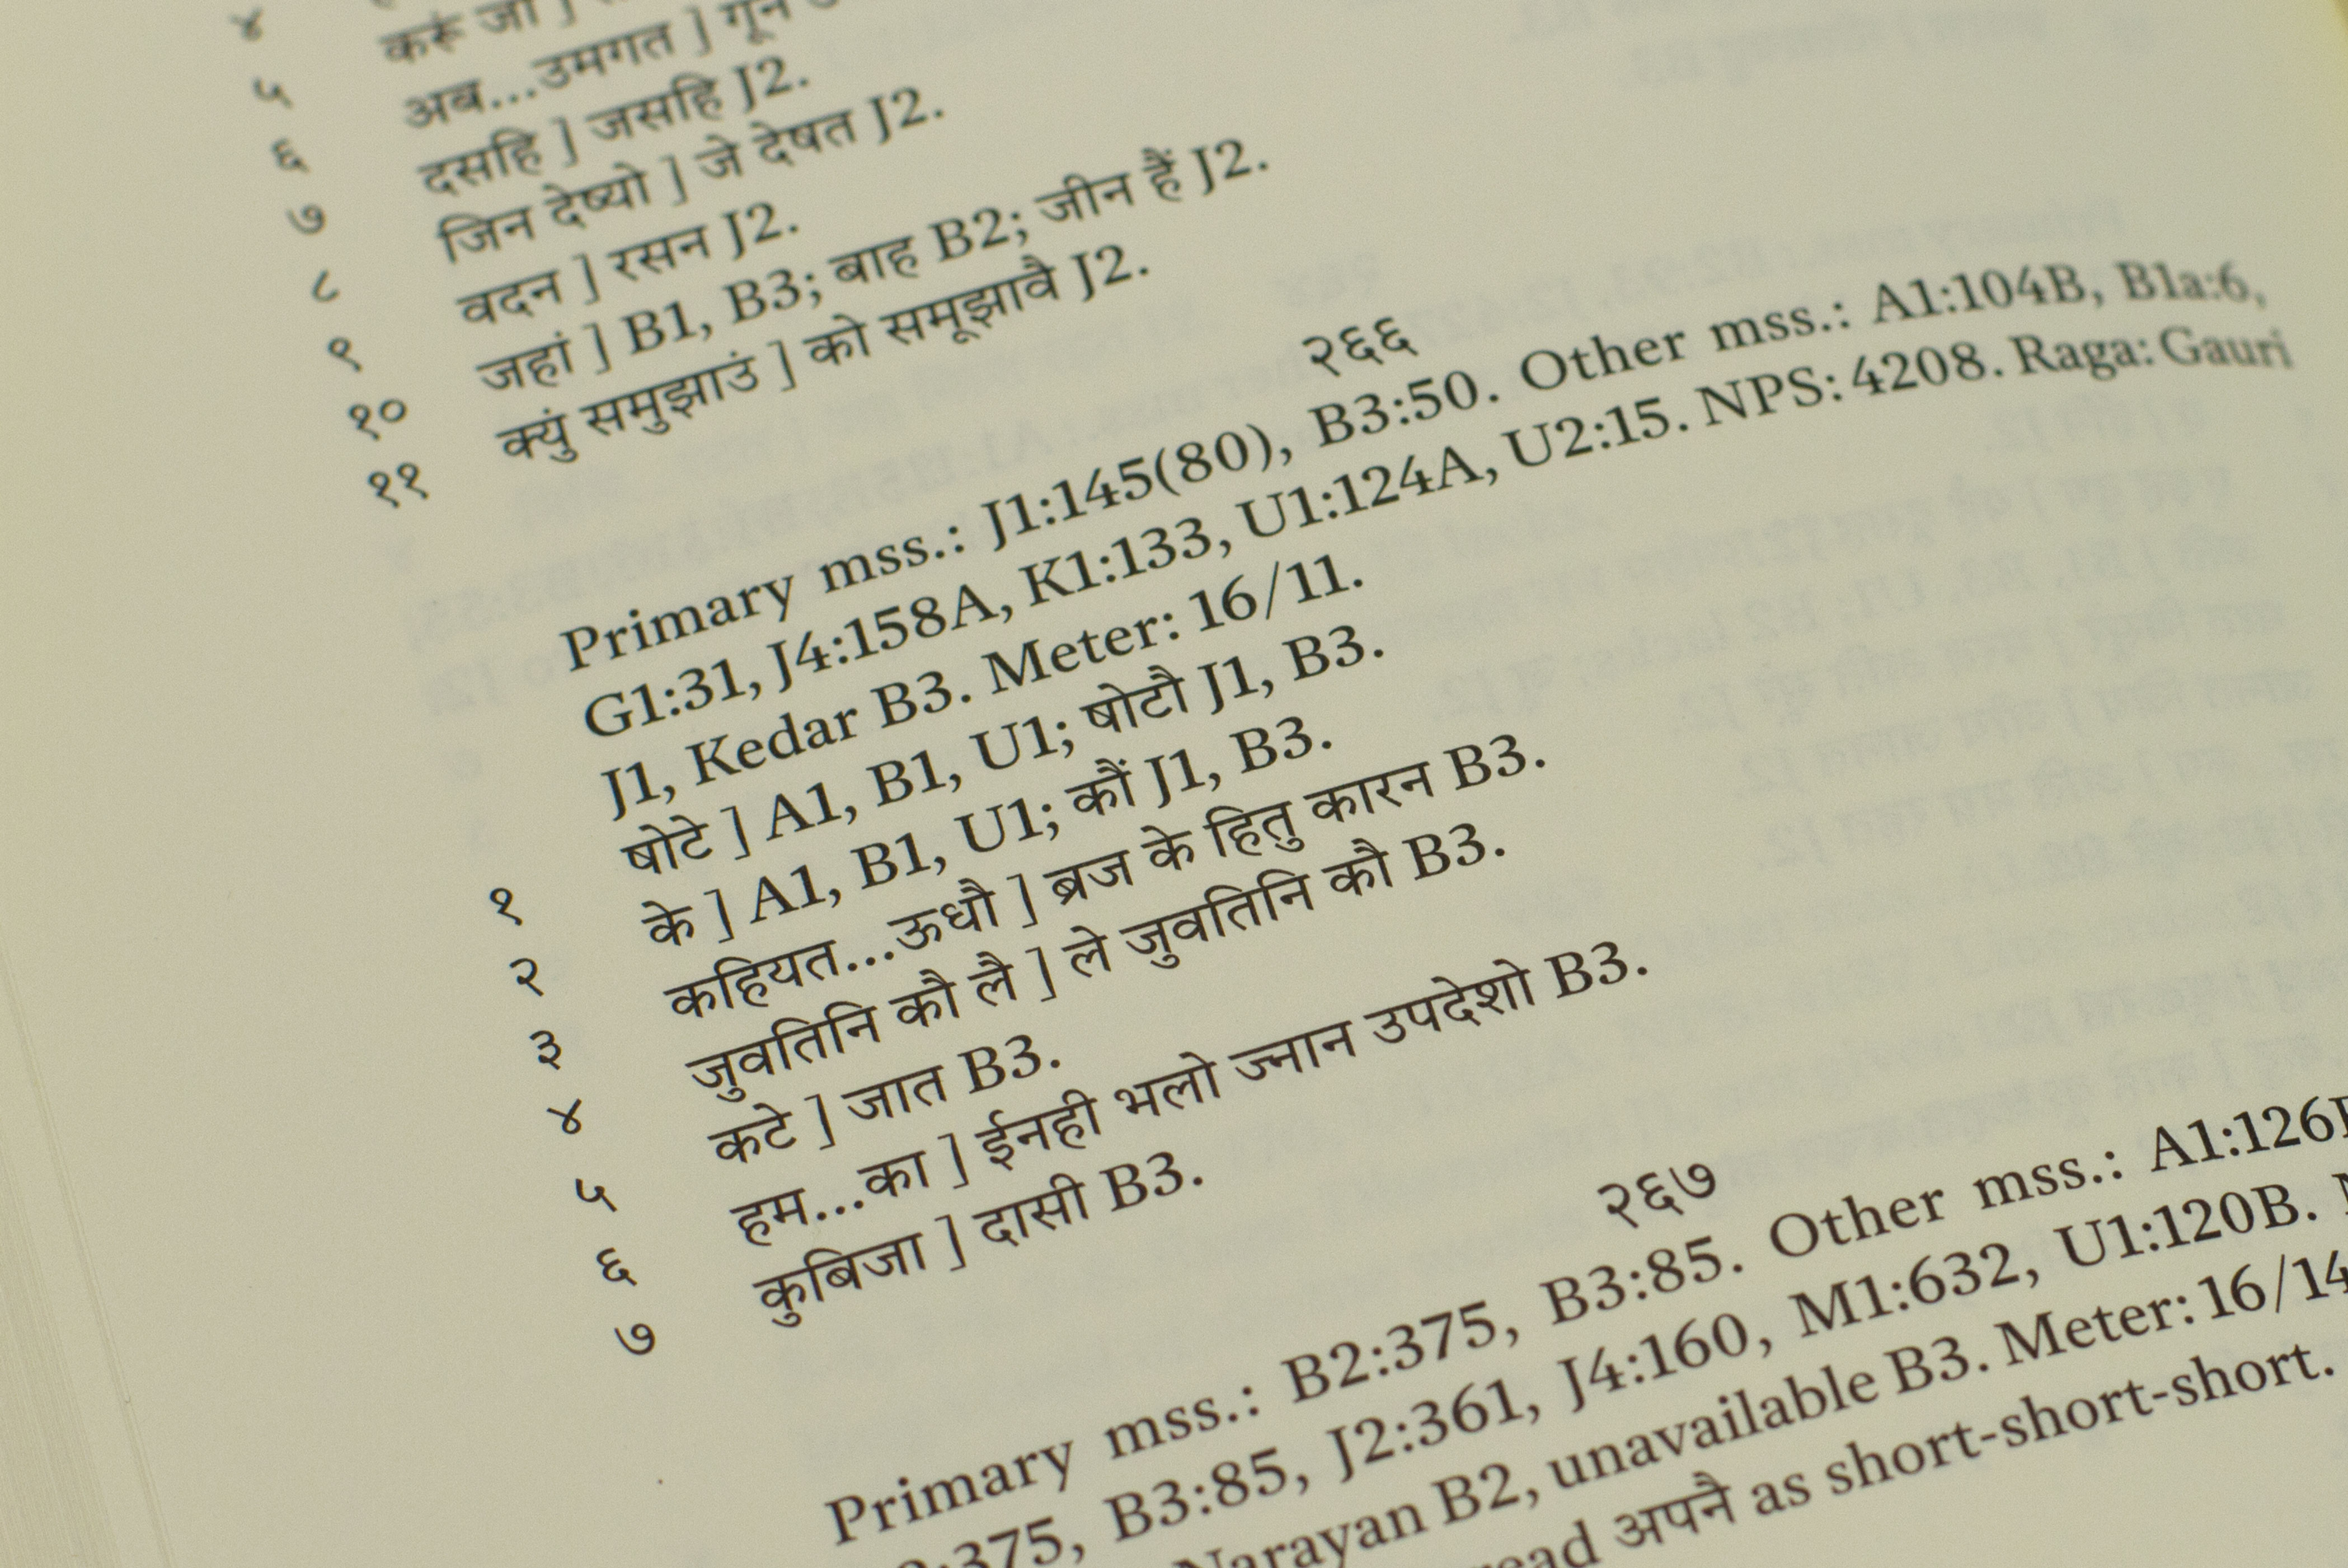 Hindi script in the notes from Murty Library volume.